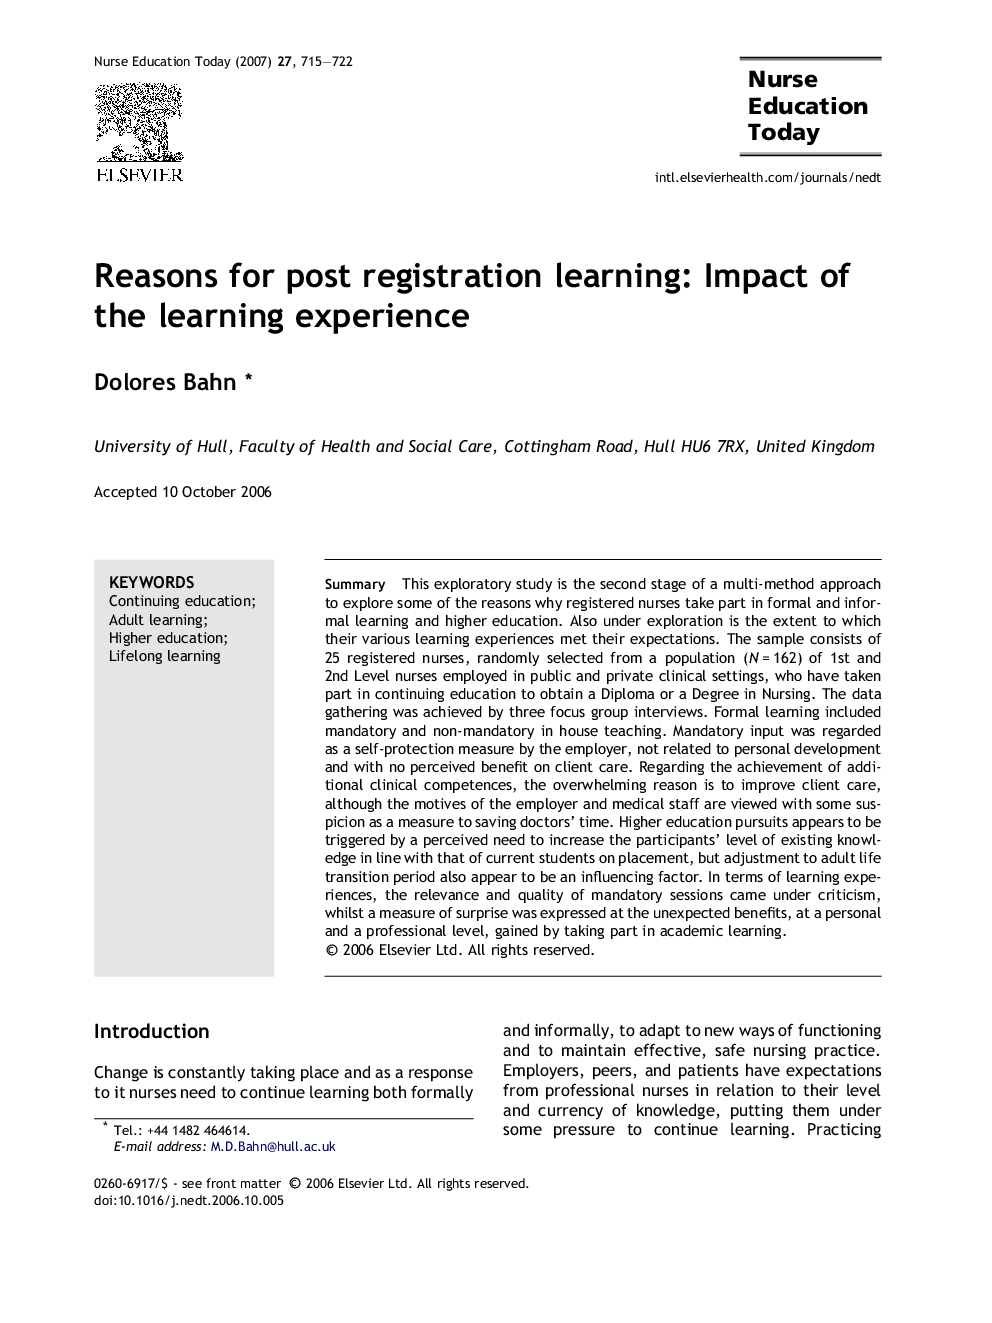 Reasons for post registration learning: Impact of the learning experience